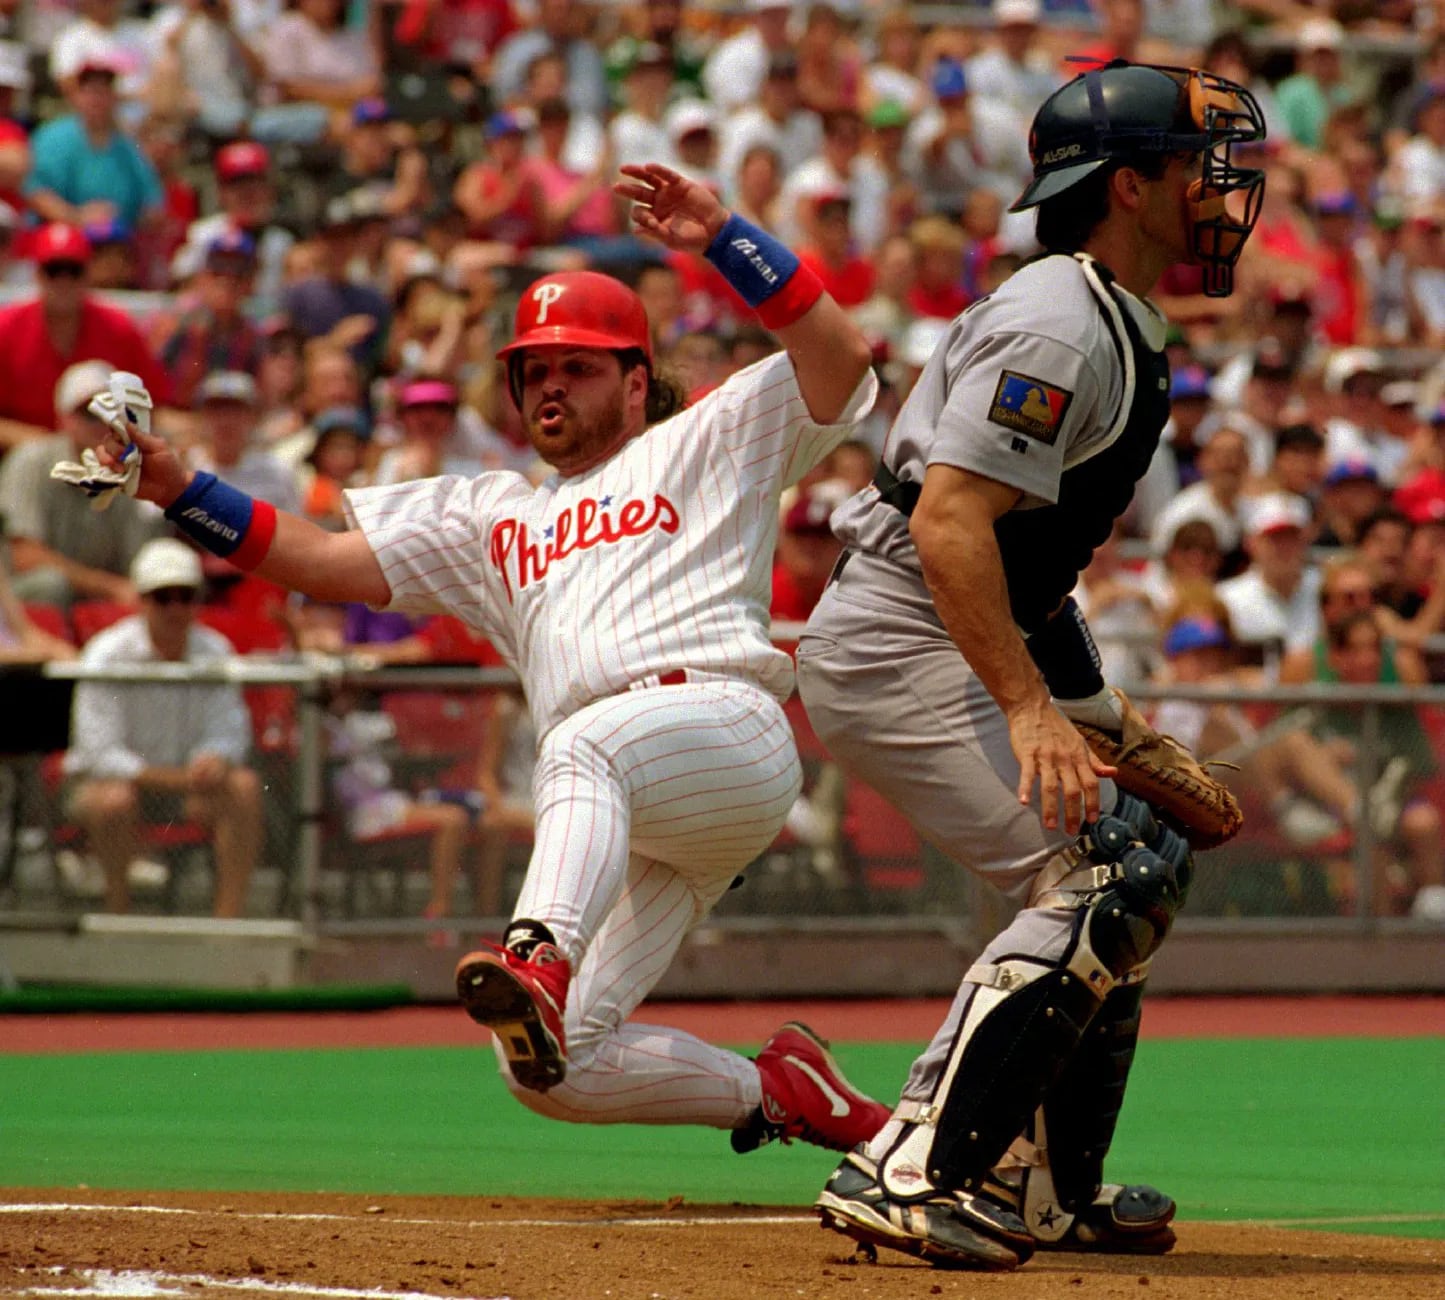 Ex-Phillie Lenny Dykstra says he suffered brain damage from prison beating, MLB